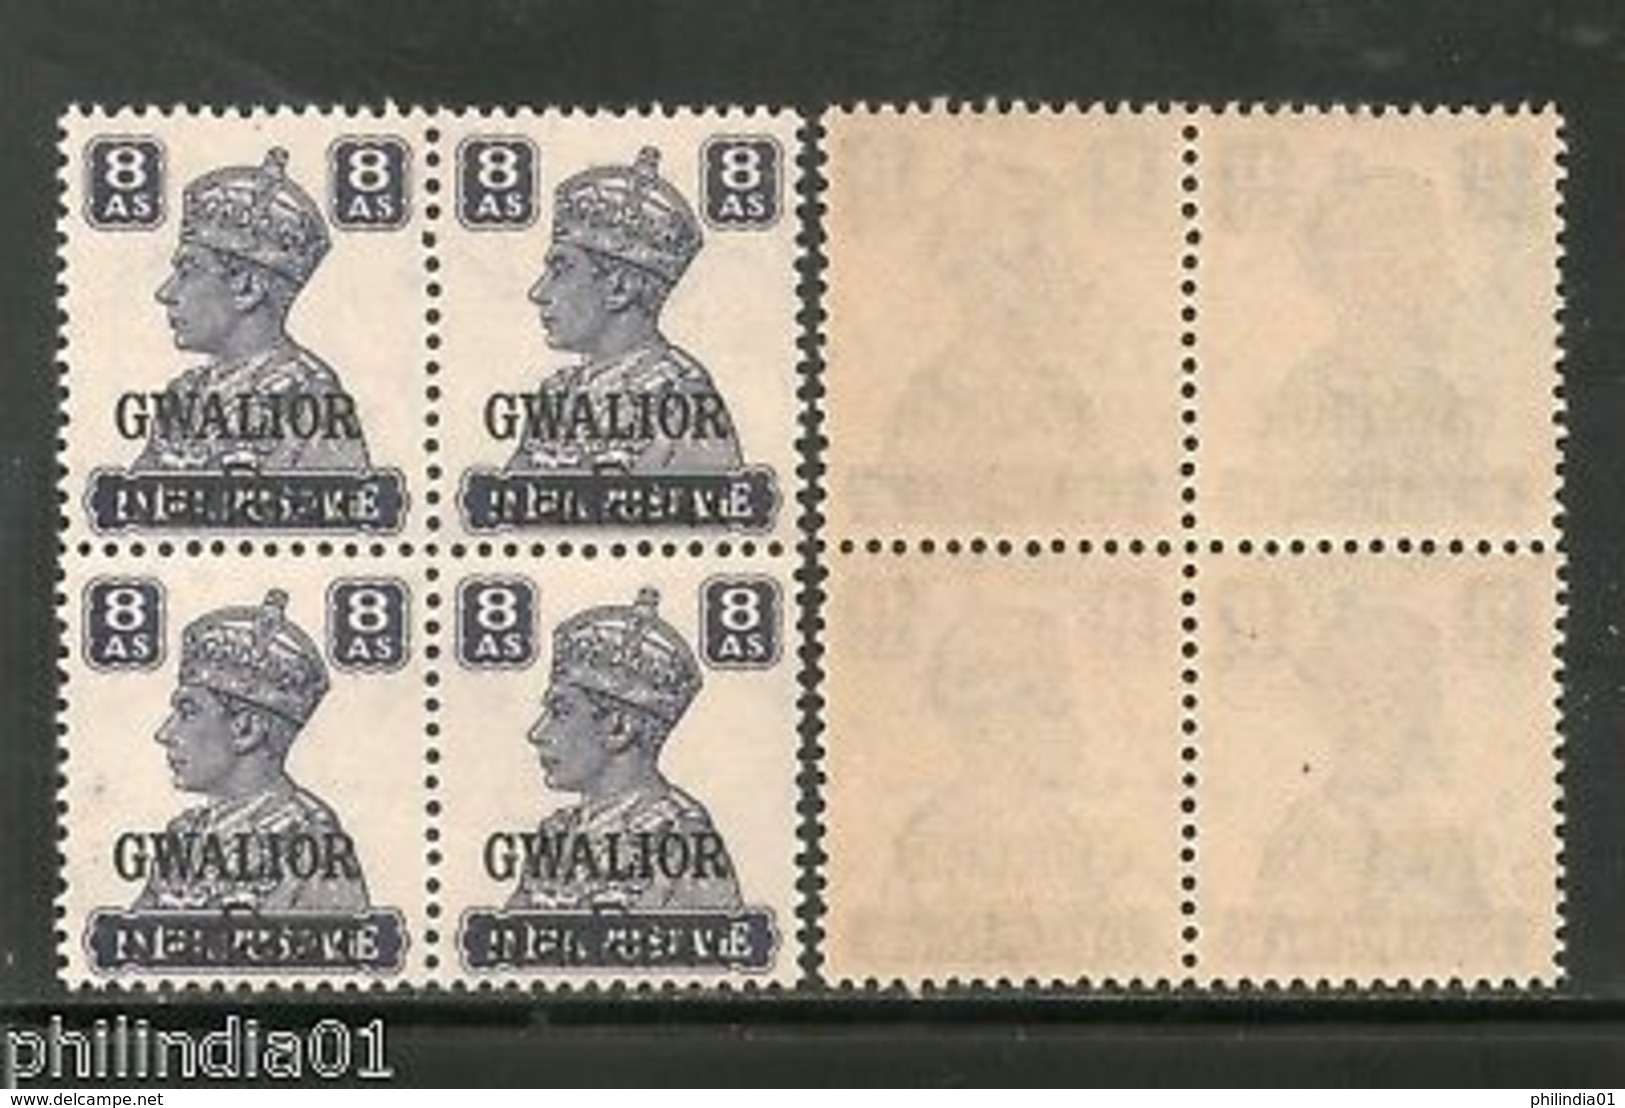 India Gwalior State 8As KG VI Postage Stamp SG 127 / Sc 110 BLK/4 Cat. $20 MNH - Gwalior